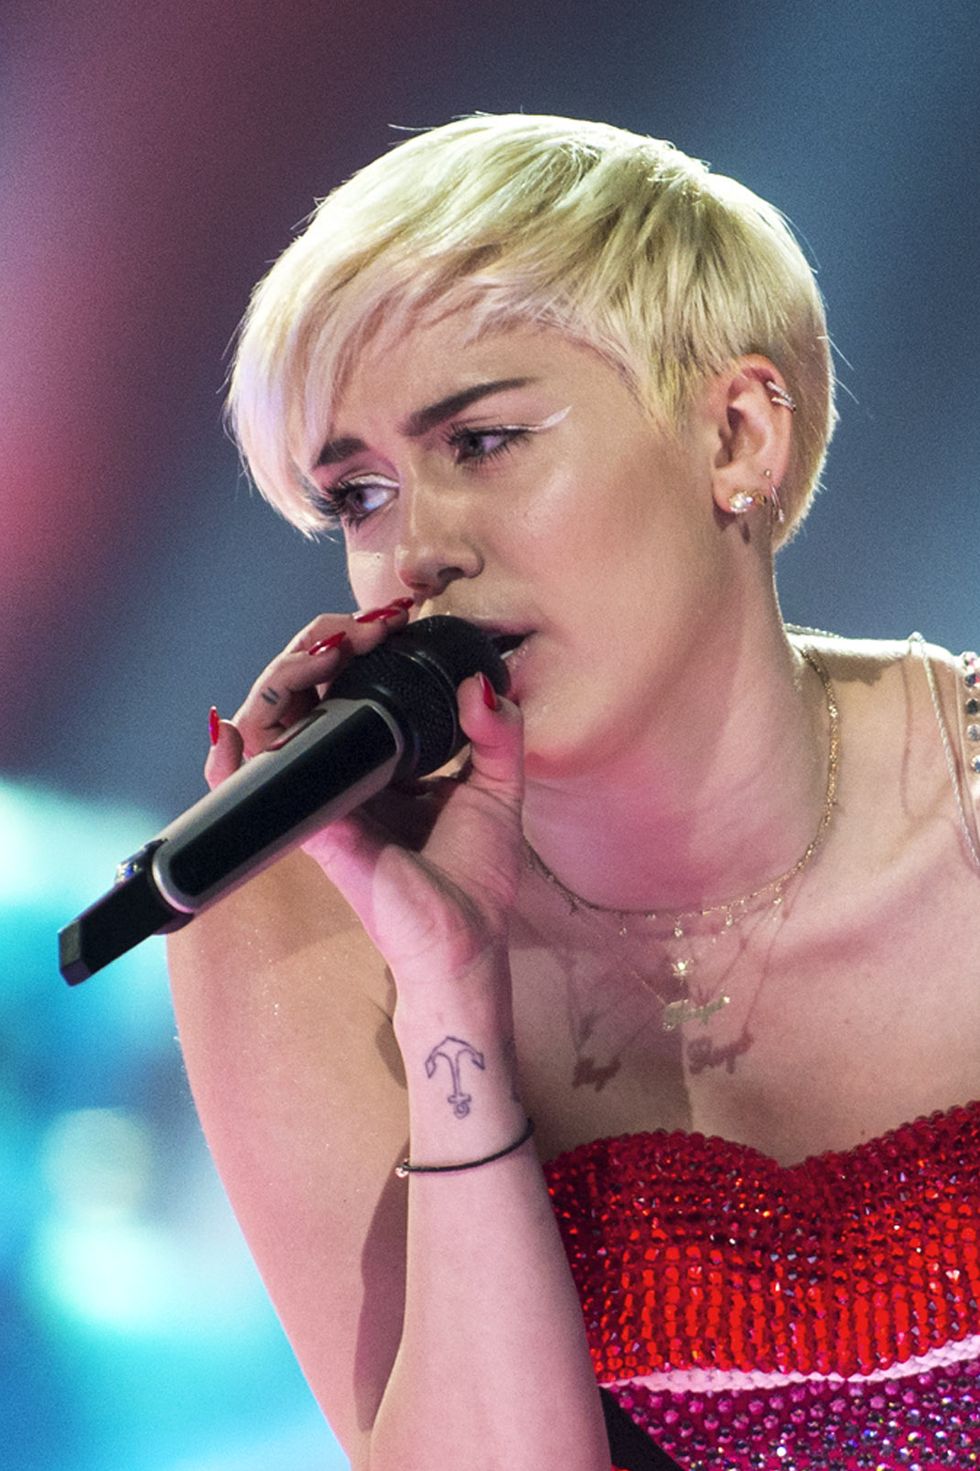 Miley Cyrus Performs At First Direct Arena In Leeds